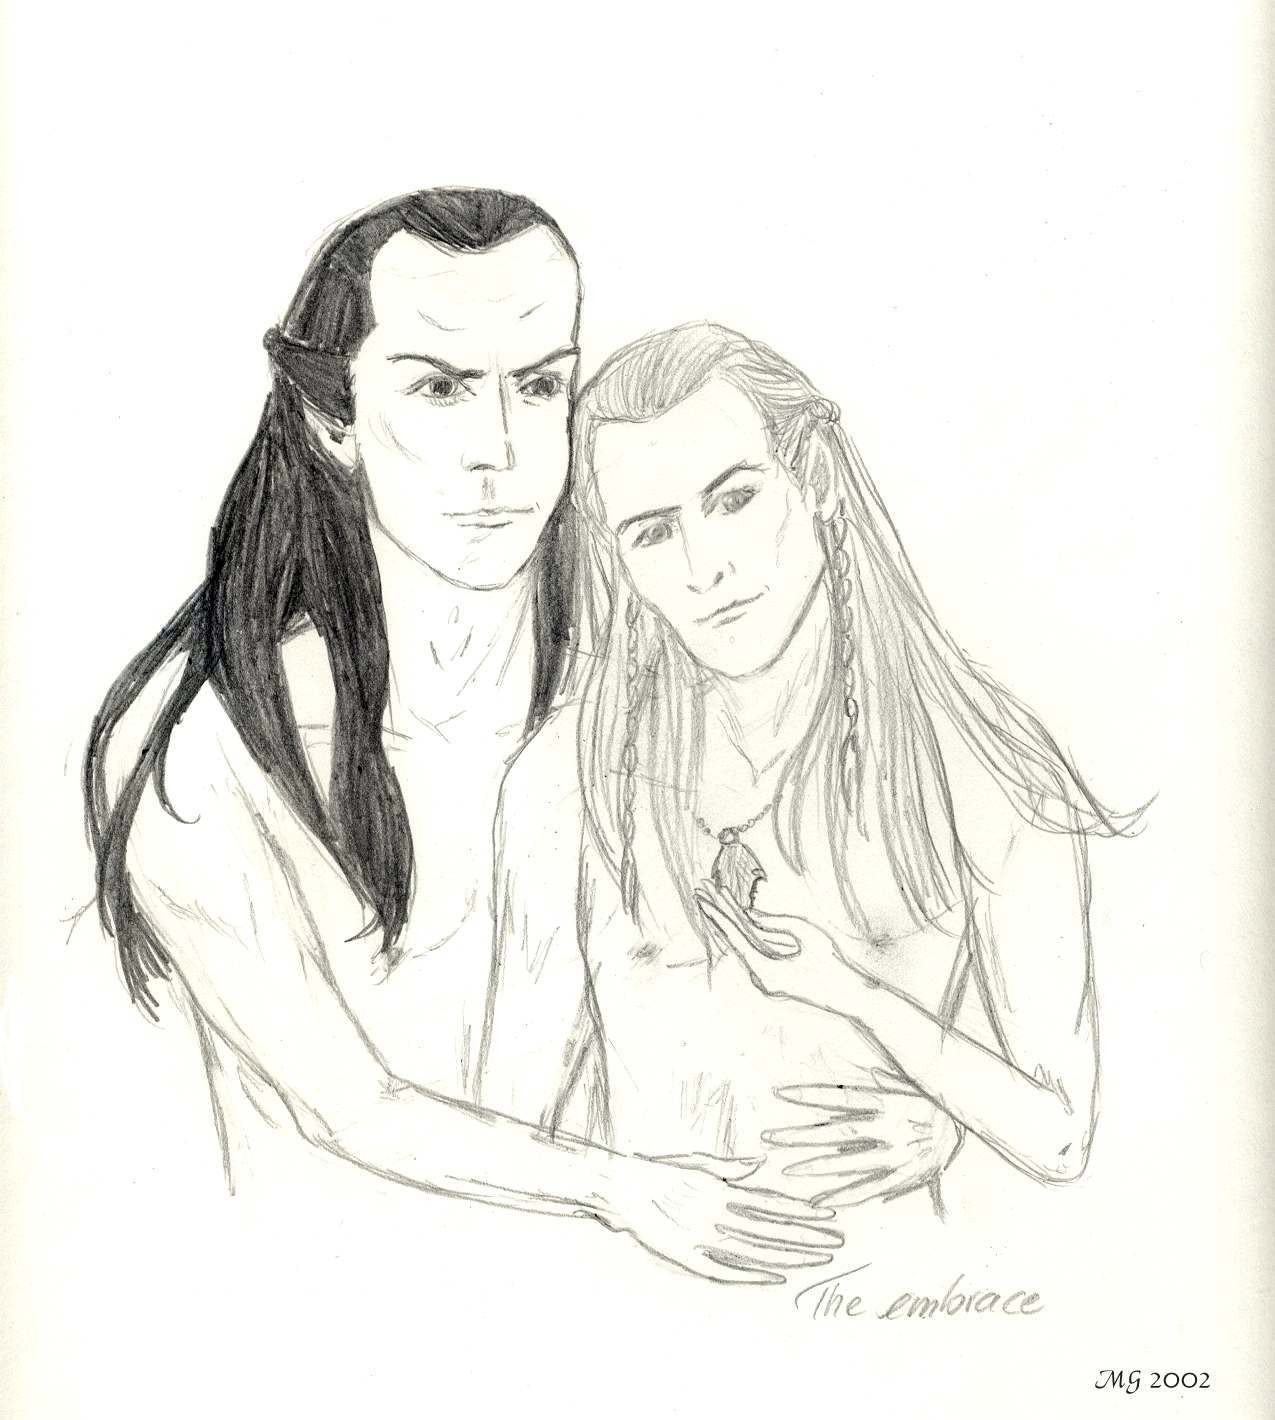 The Embrace, Legolas and Elrond